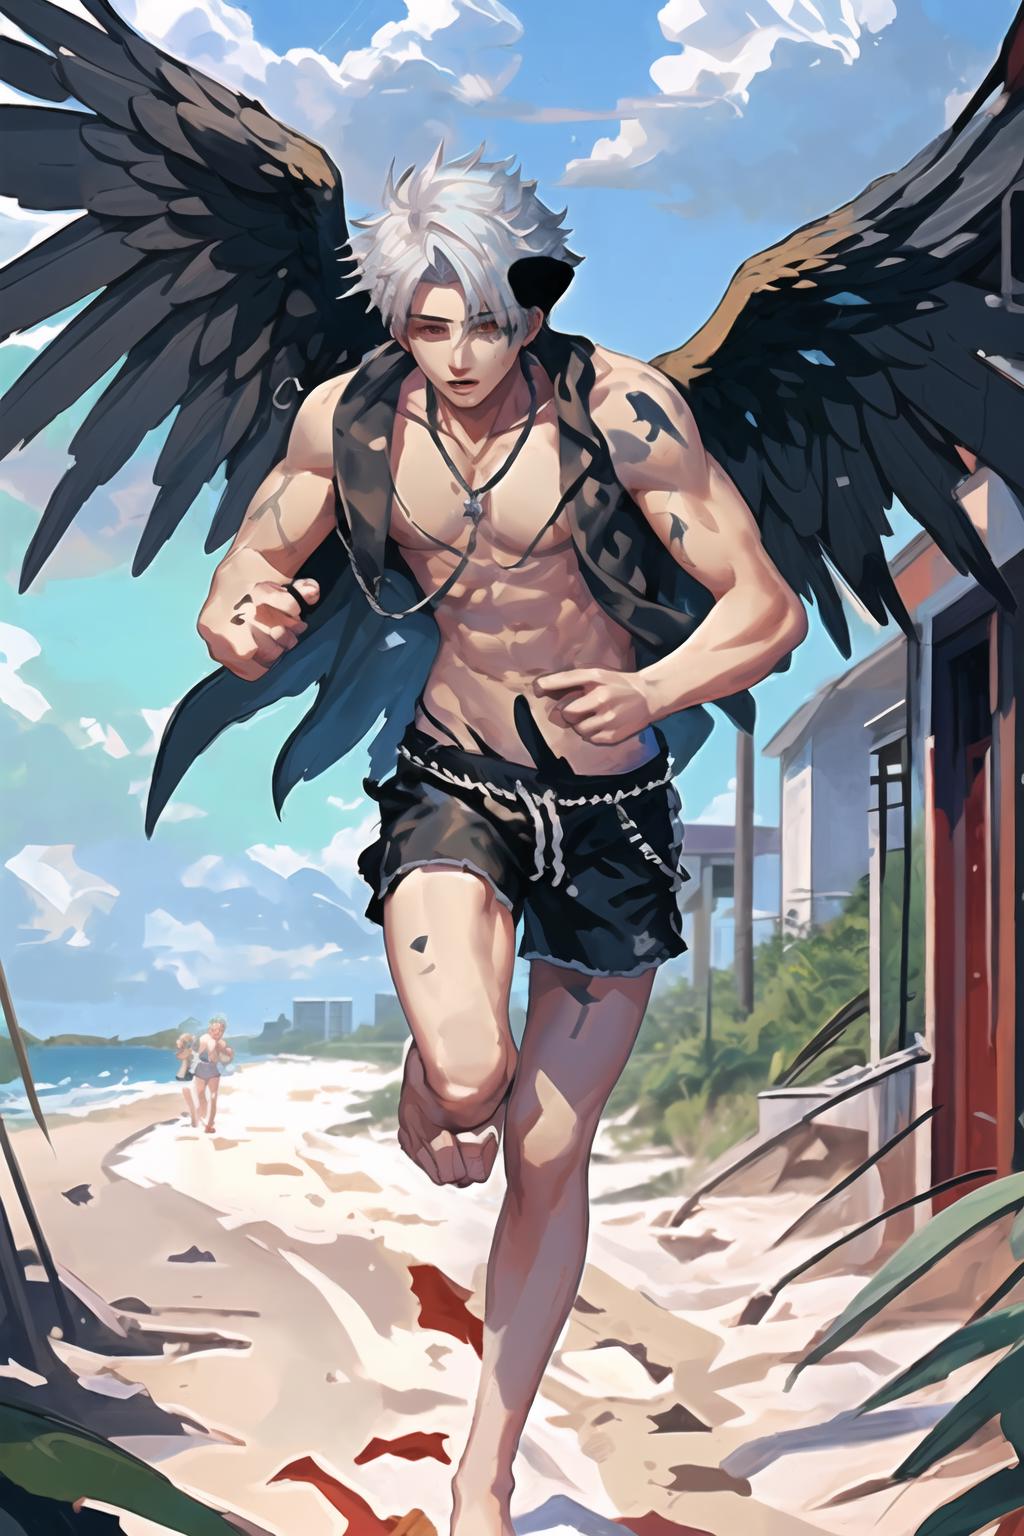 Dark angel  Male Anime and Fantasy Wallpapers and Images  Desktop Nexus  Groups